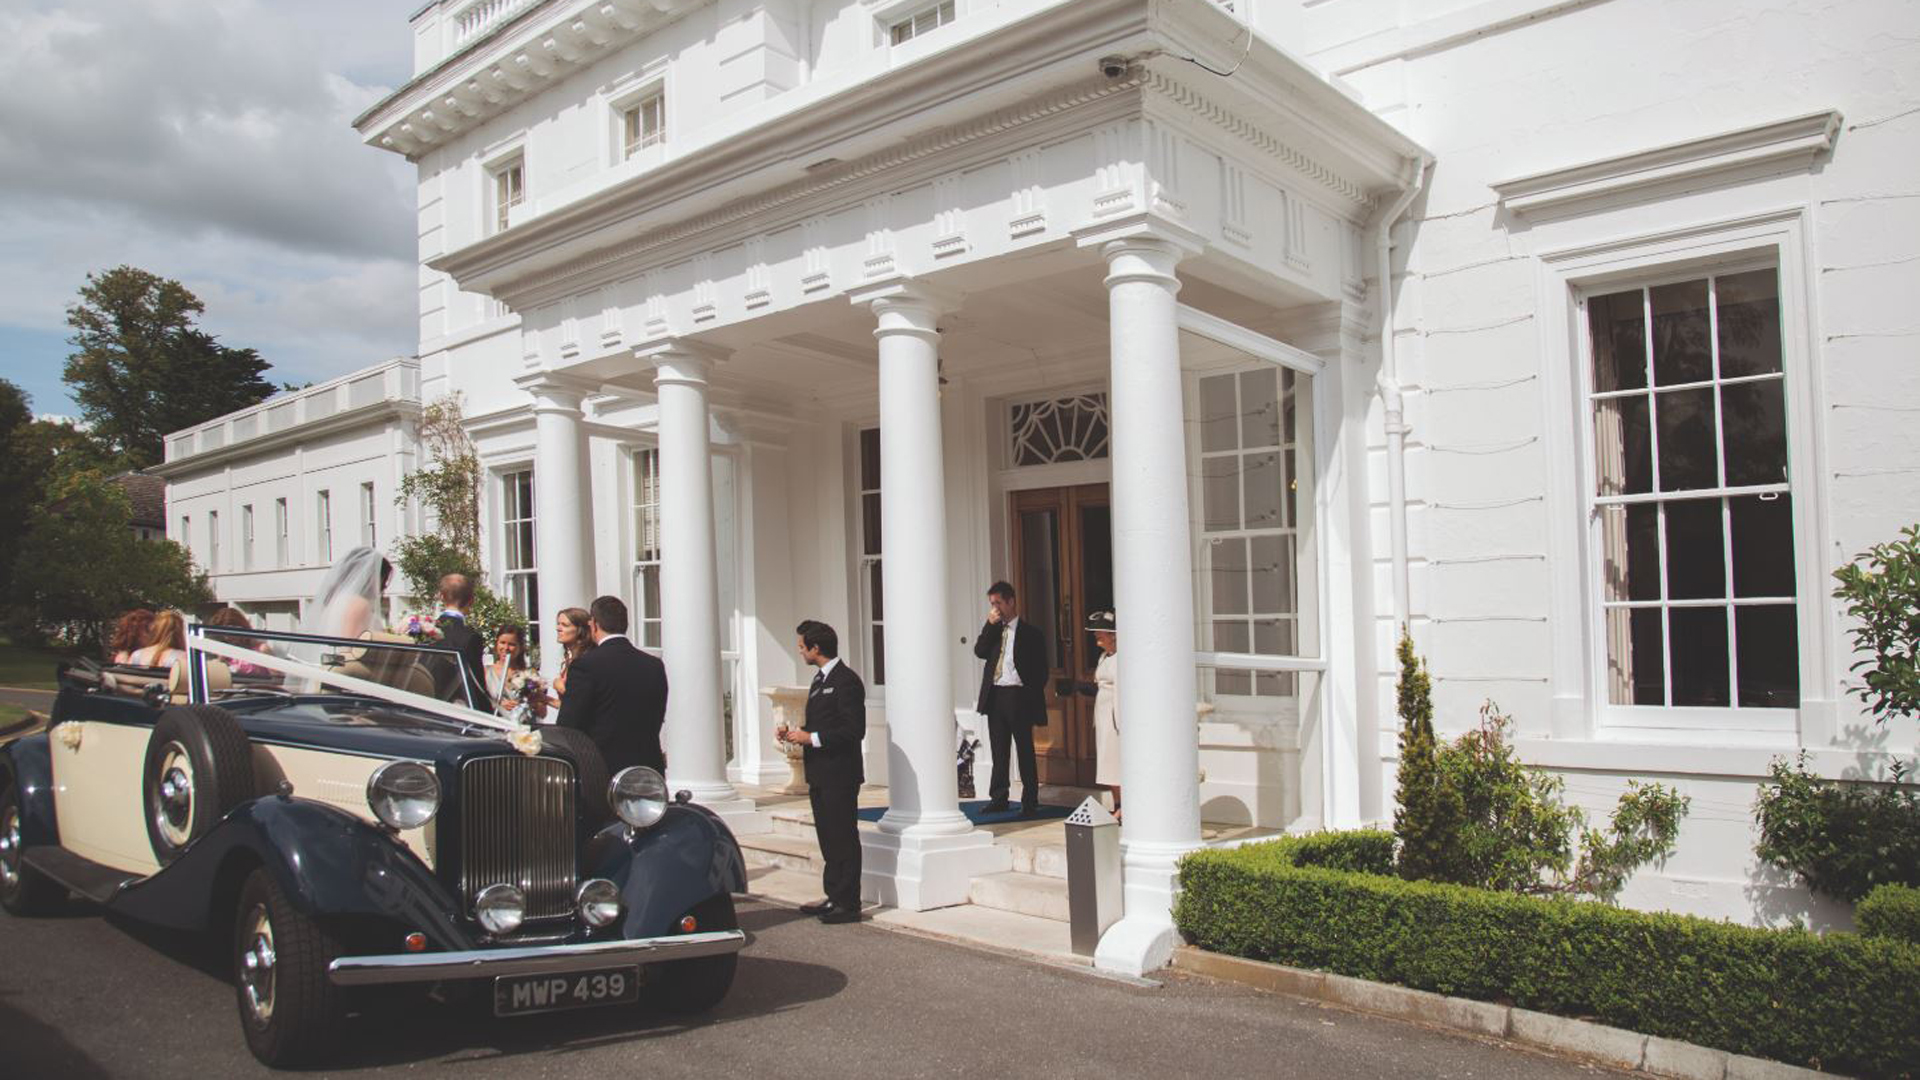 A photo outside henley reception building with wedding car